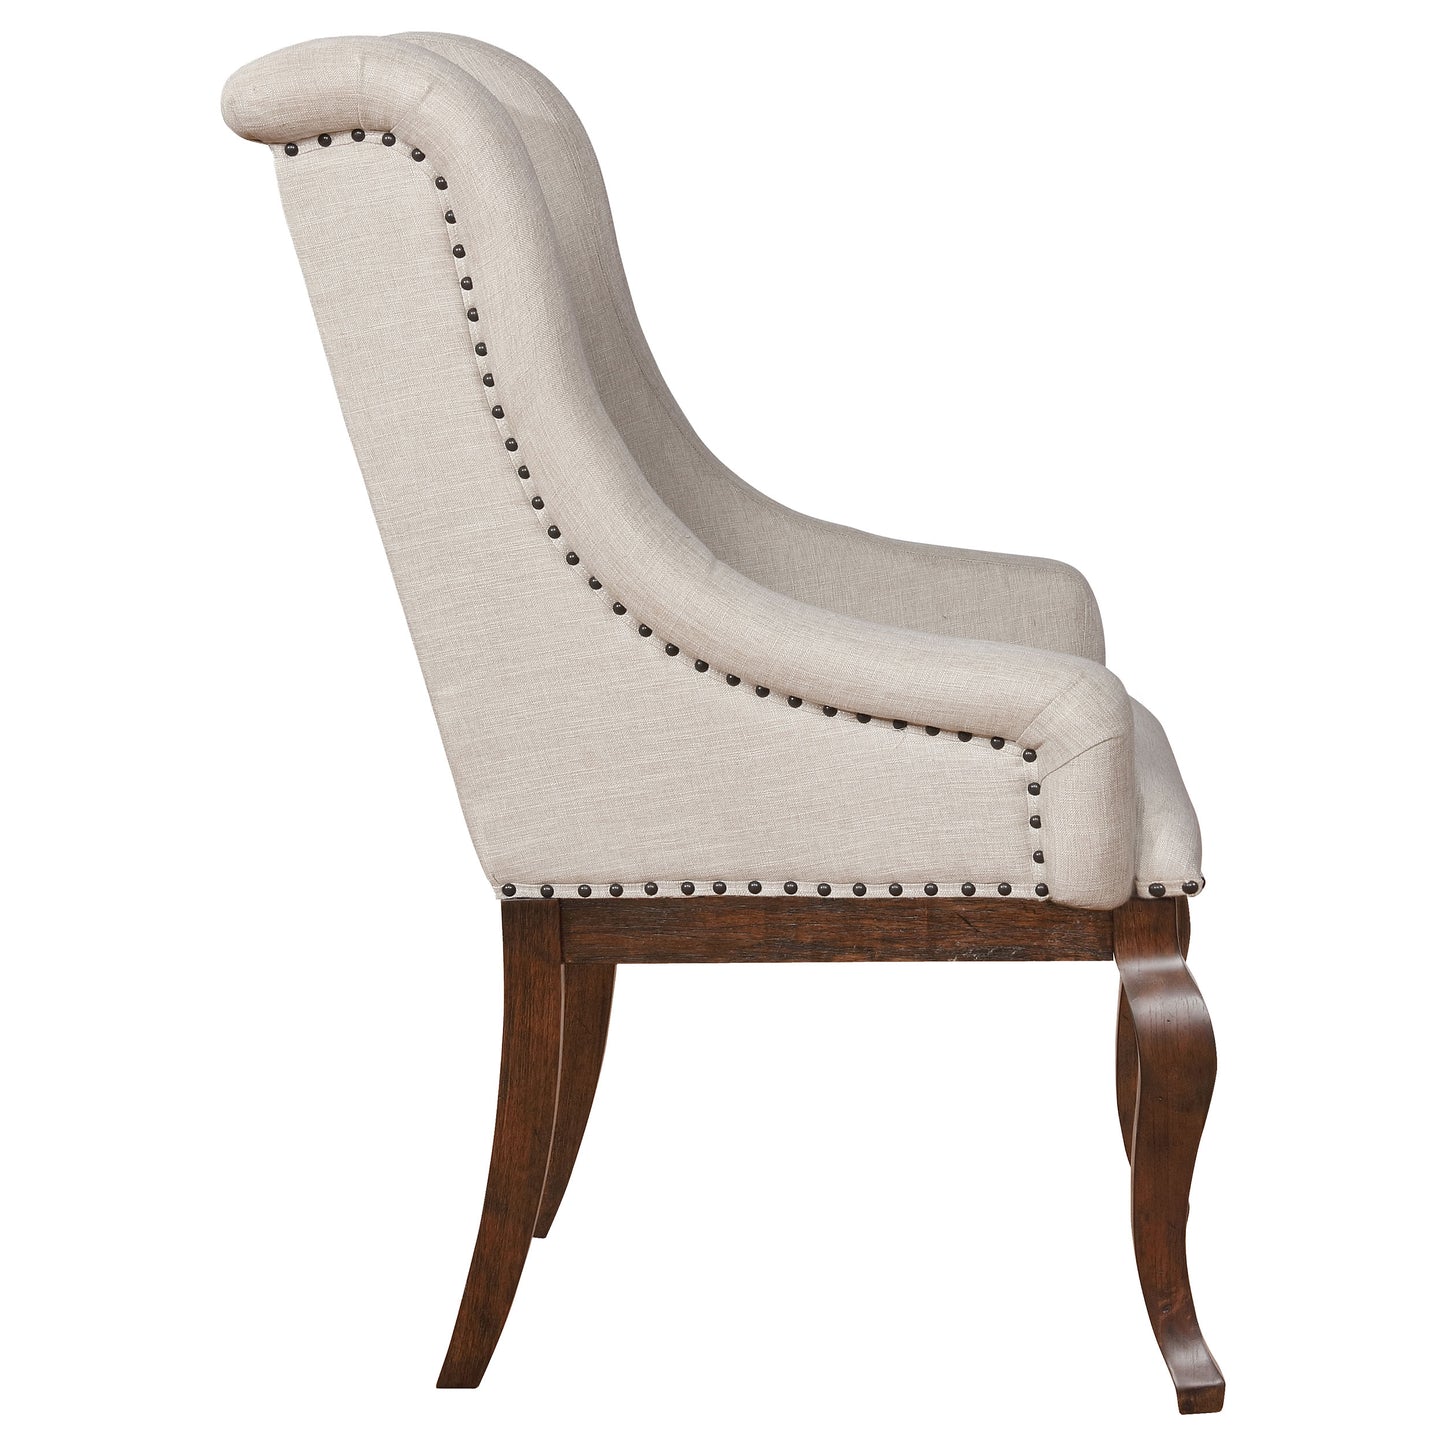 Brockway Tufted Arm Chairs Cream and Antique Java (Set of 2)